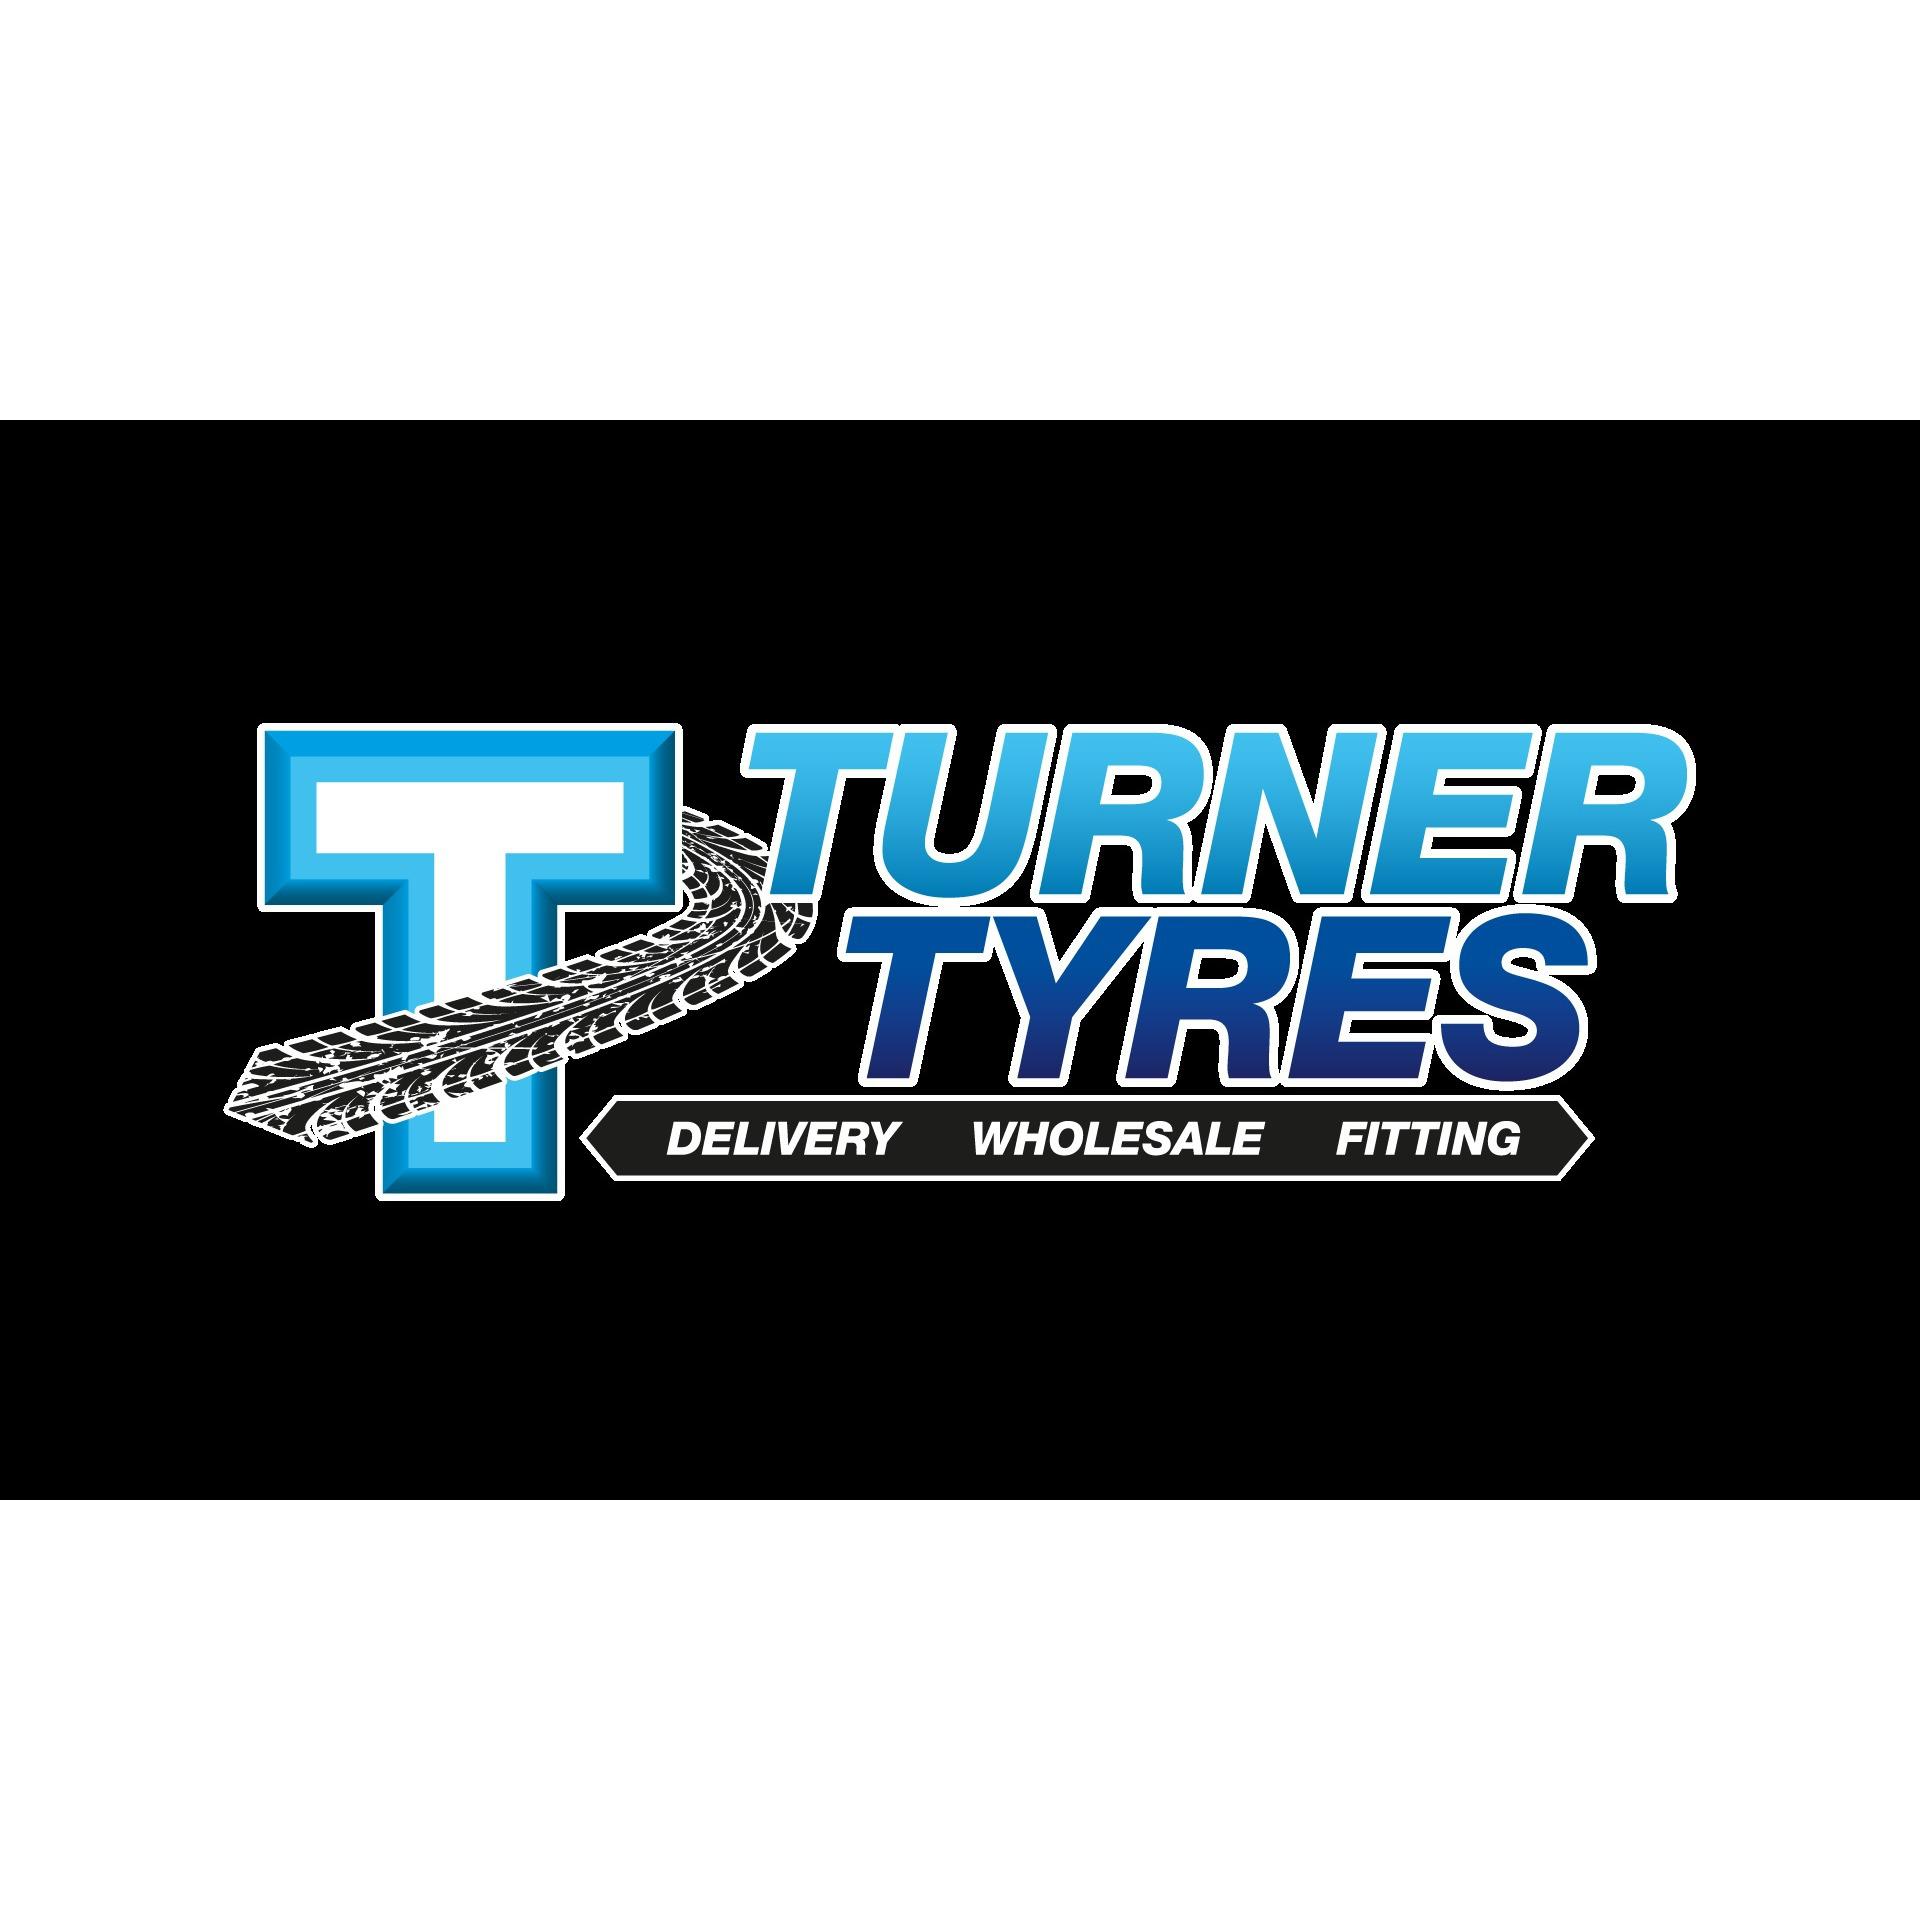 TURNER TYRES | Norwich Tyres | Logo Turner Tyres Norwich 01603 273078